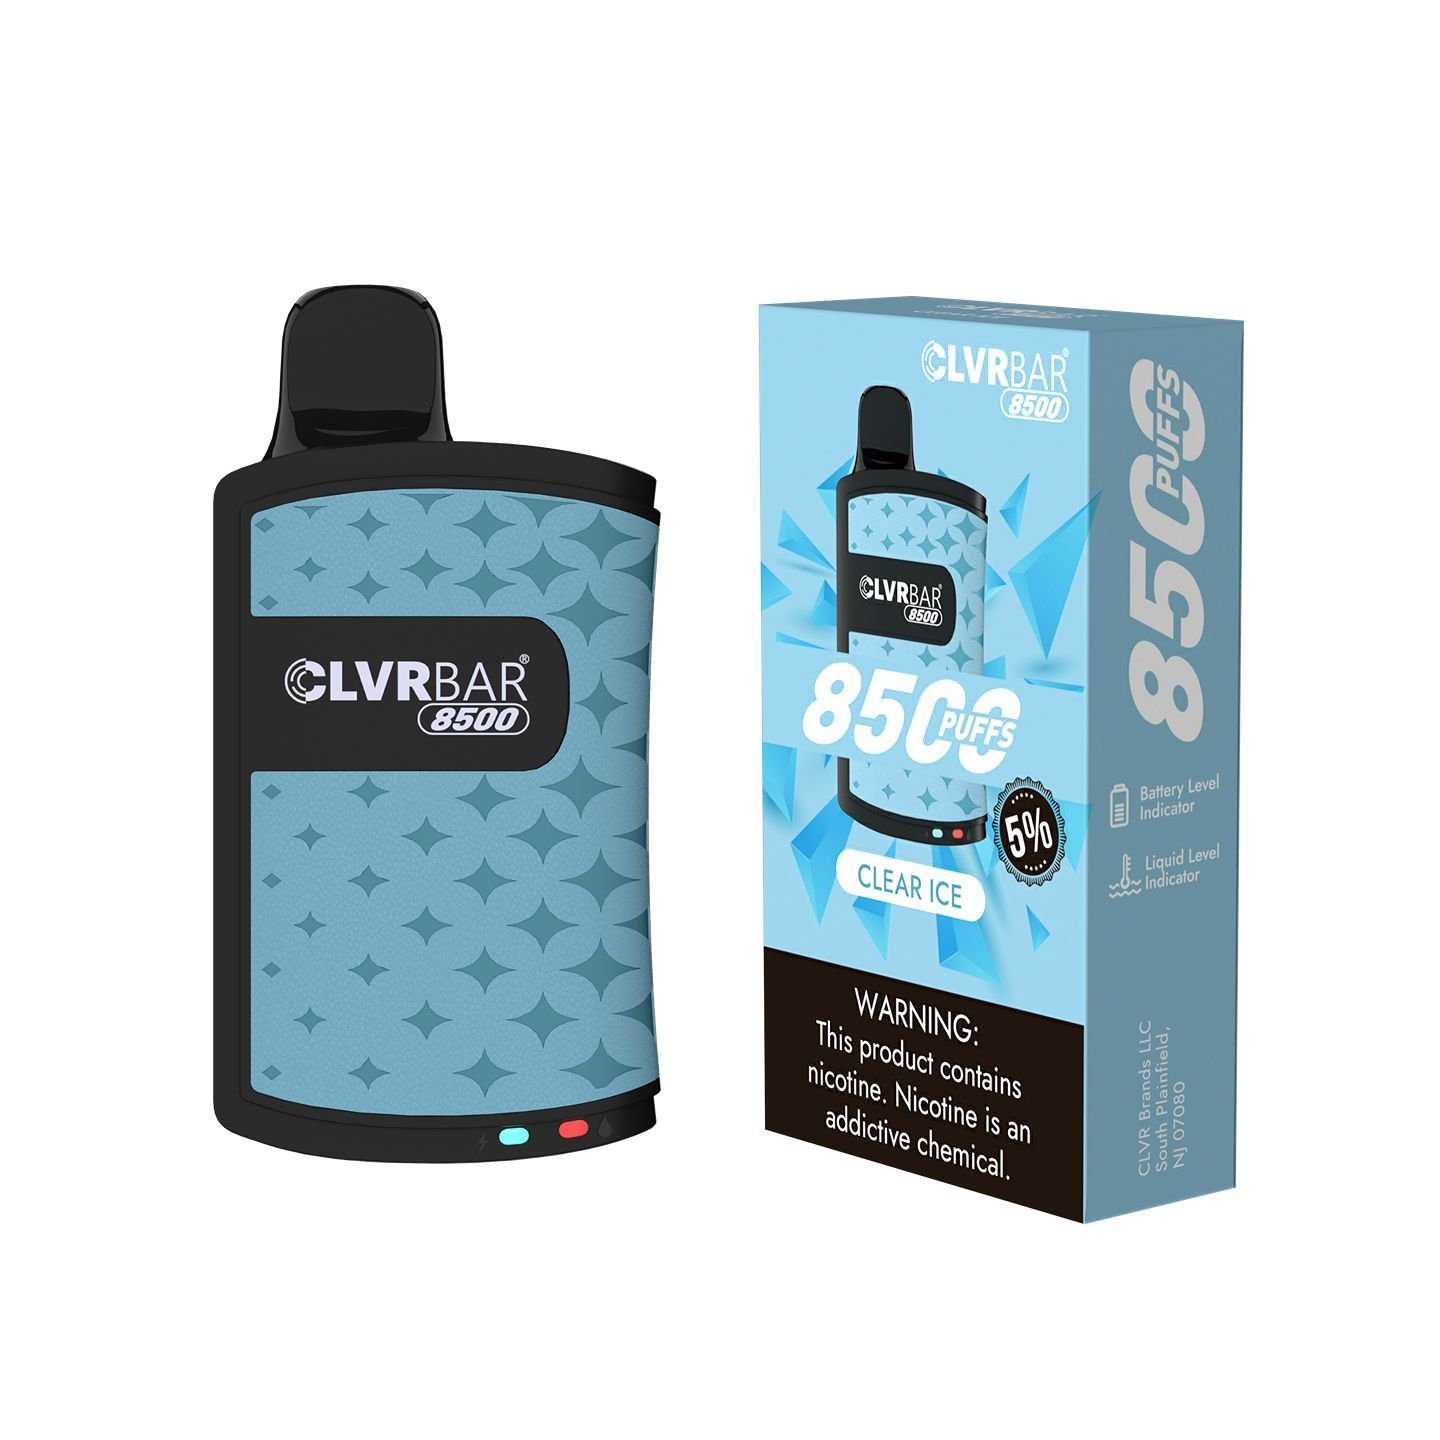 CLVRBAR disposable device 8500 Puffs- Clear Ice